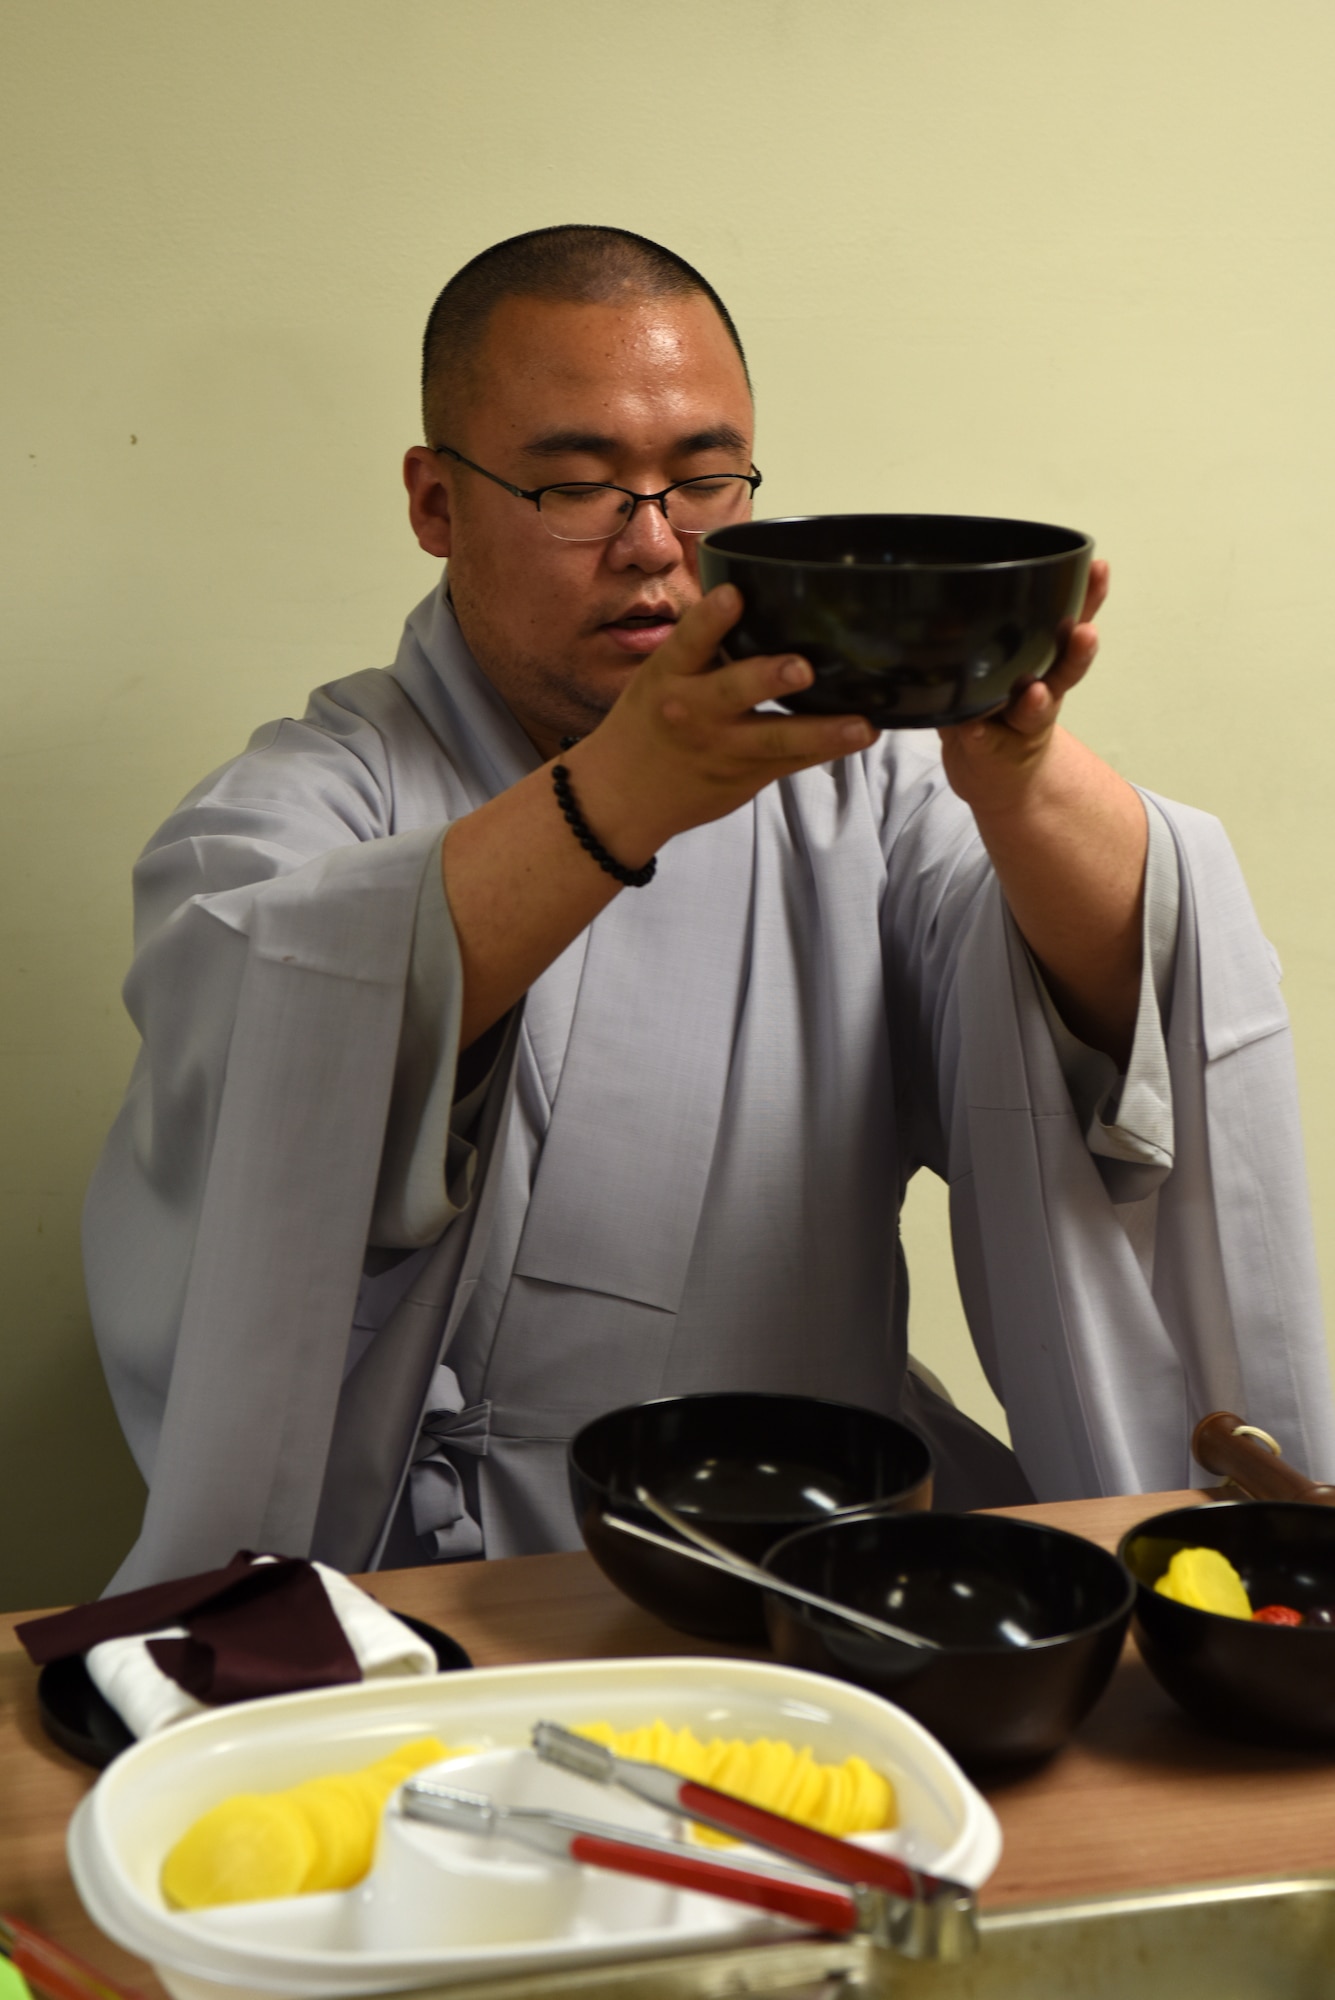 Republic of Korea Air Force Capt. Sungcheol Lee, 38th Fighter Group chaplain, recites a prayer before eating during a Buddhist immersion course at Kunsan Air Base, Republic of Korea, April 11, 2019. The meal consisted of rice, soup and sides each placed in their own bowl so Airmen could experience the flavors of the individual dishes. (U.S. Air Force photo by Staff Sgt. Joshua Edwards)